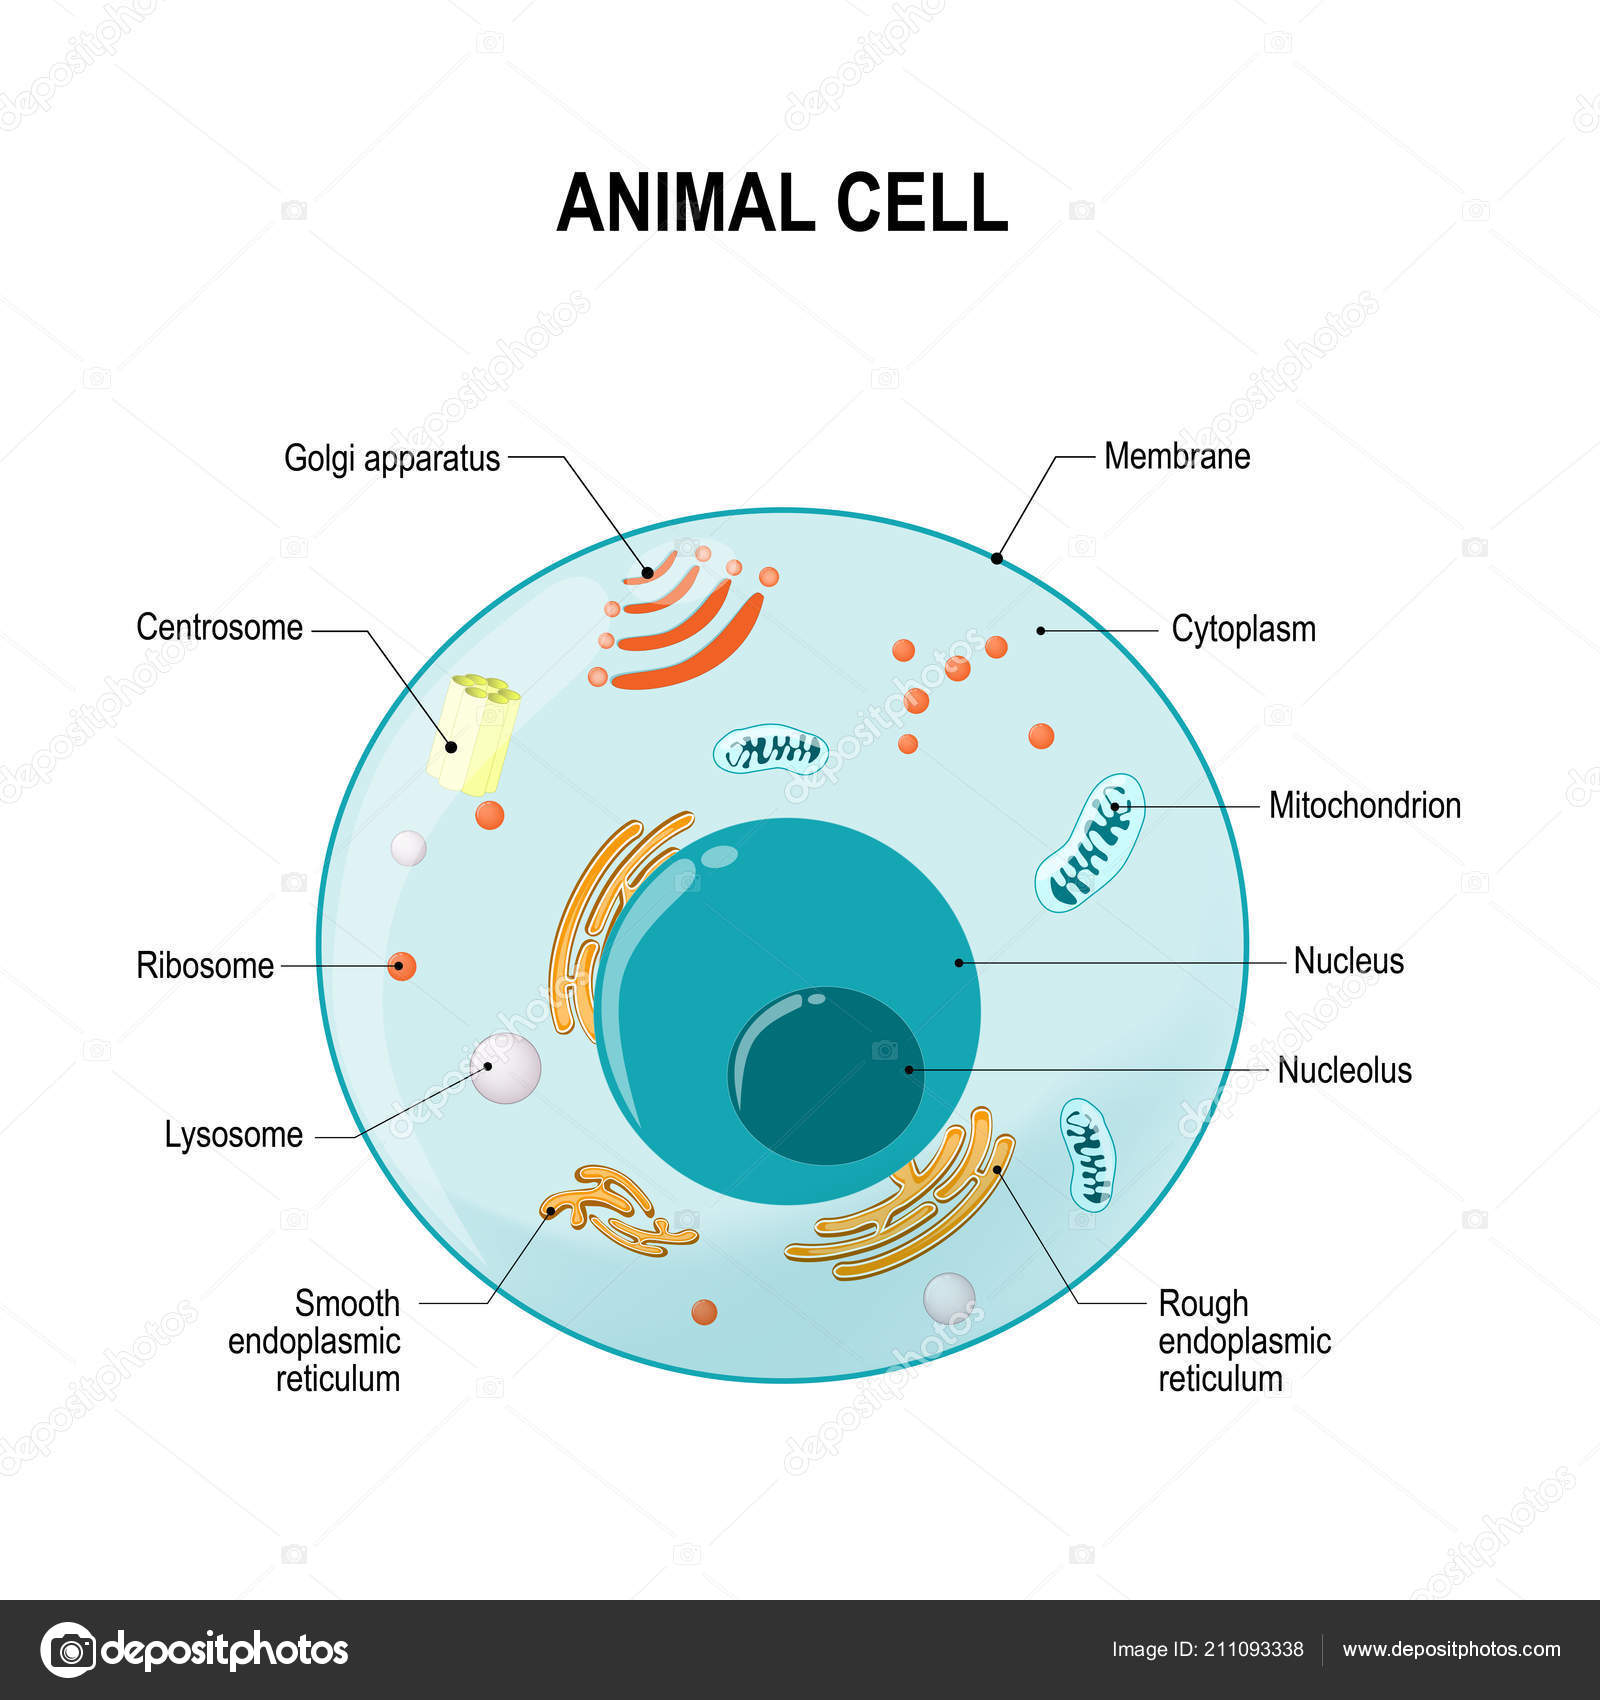 Animal Cell Diagram Human Animal Cell Cross Section Structure Eukaryotic Cell Vector